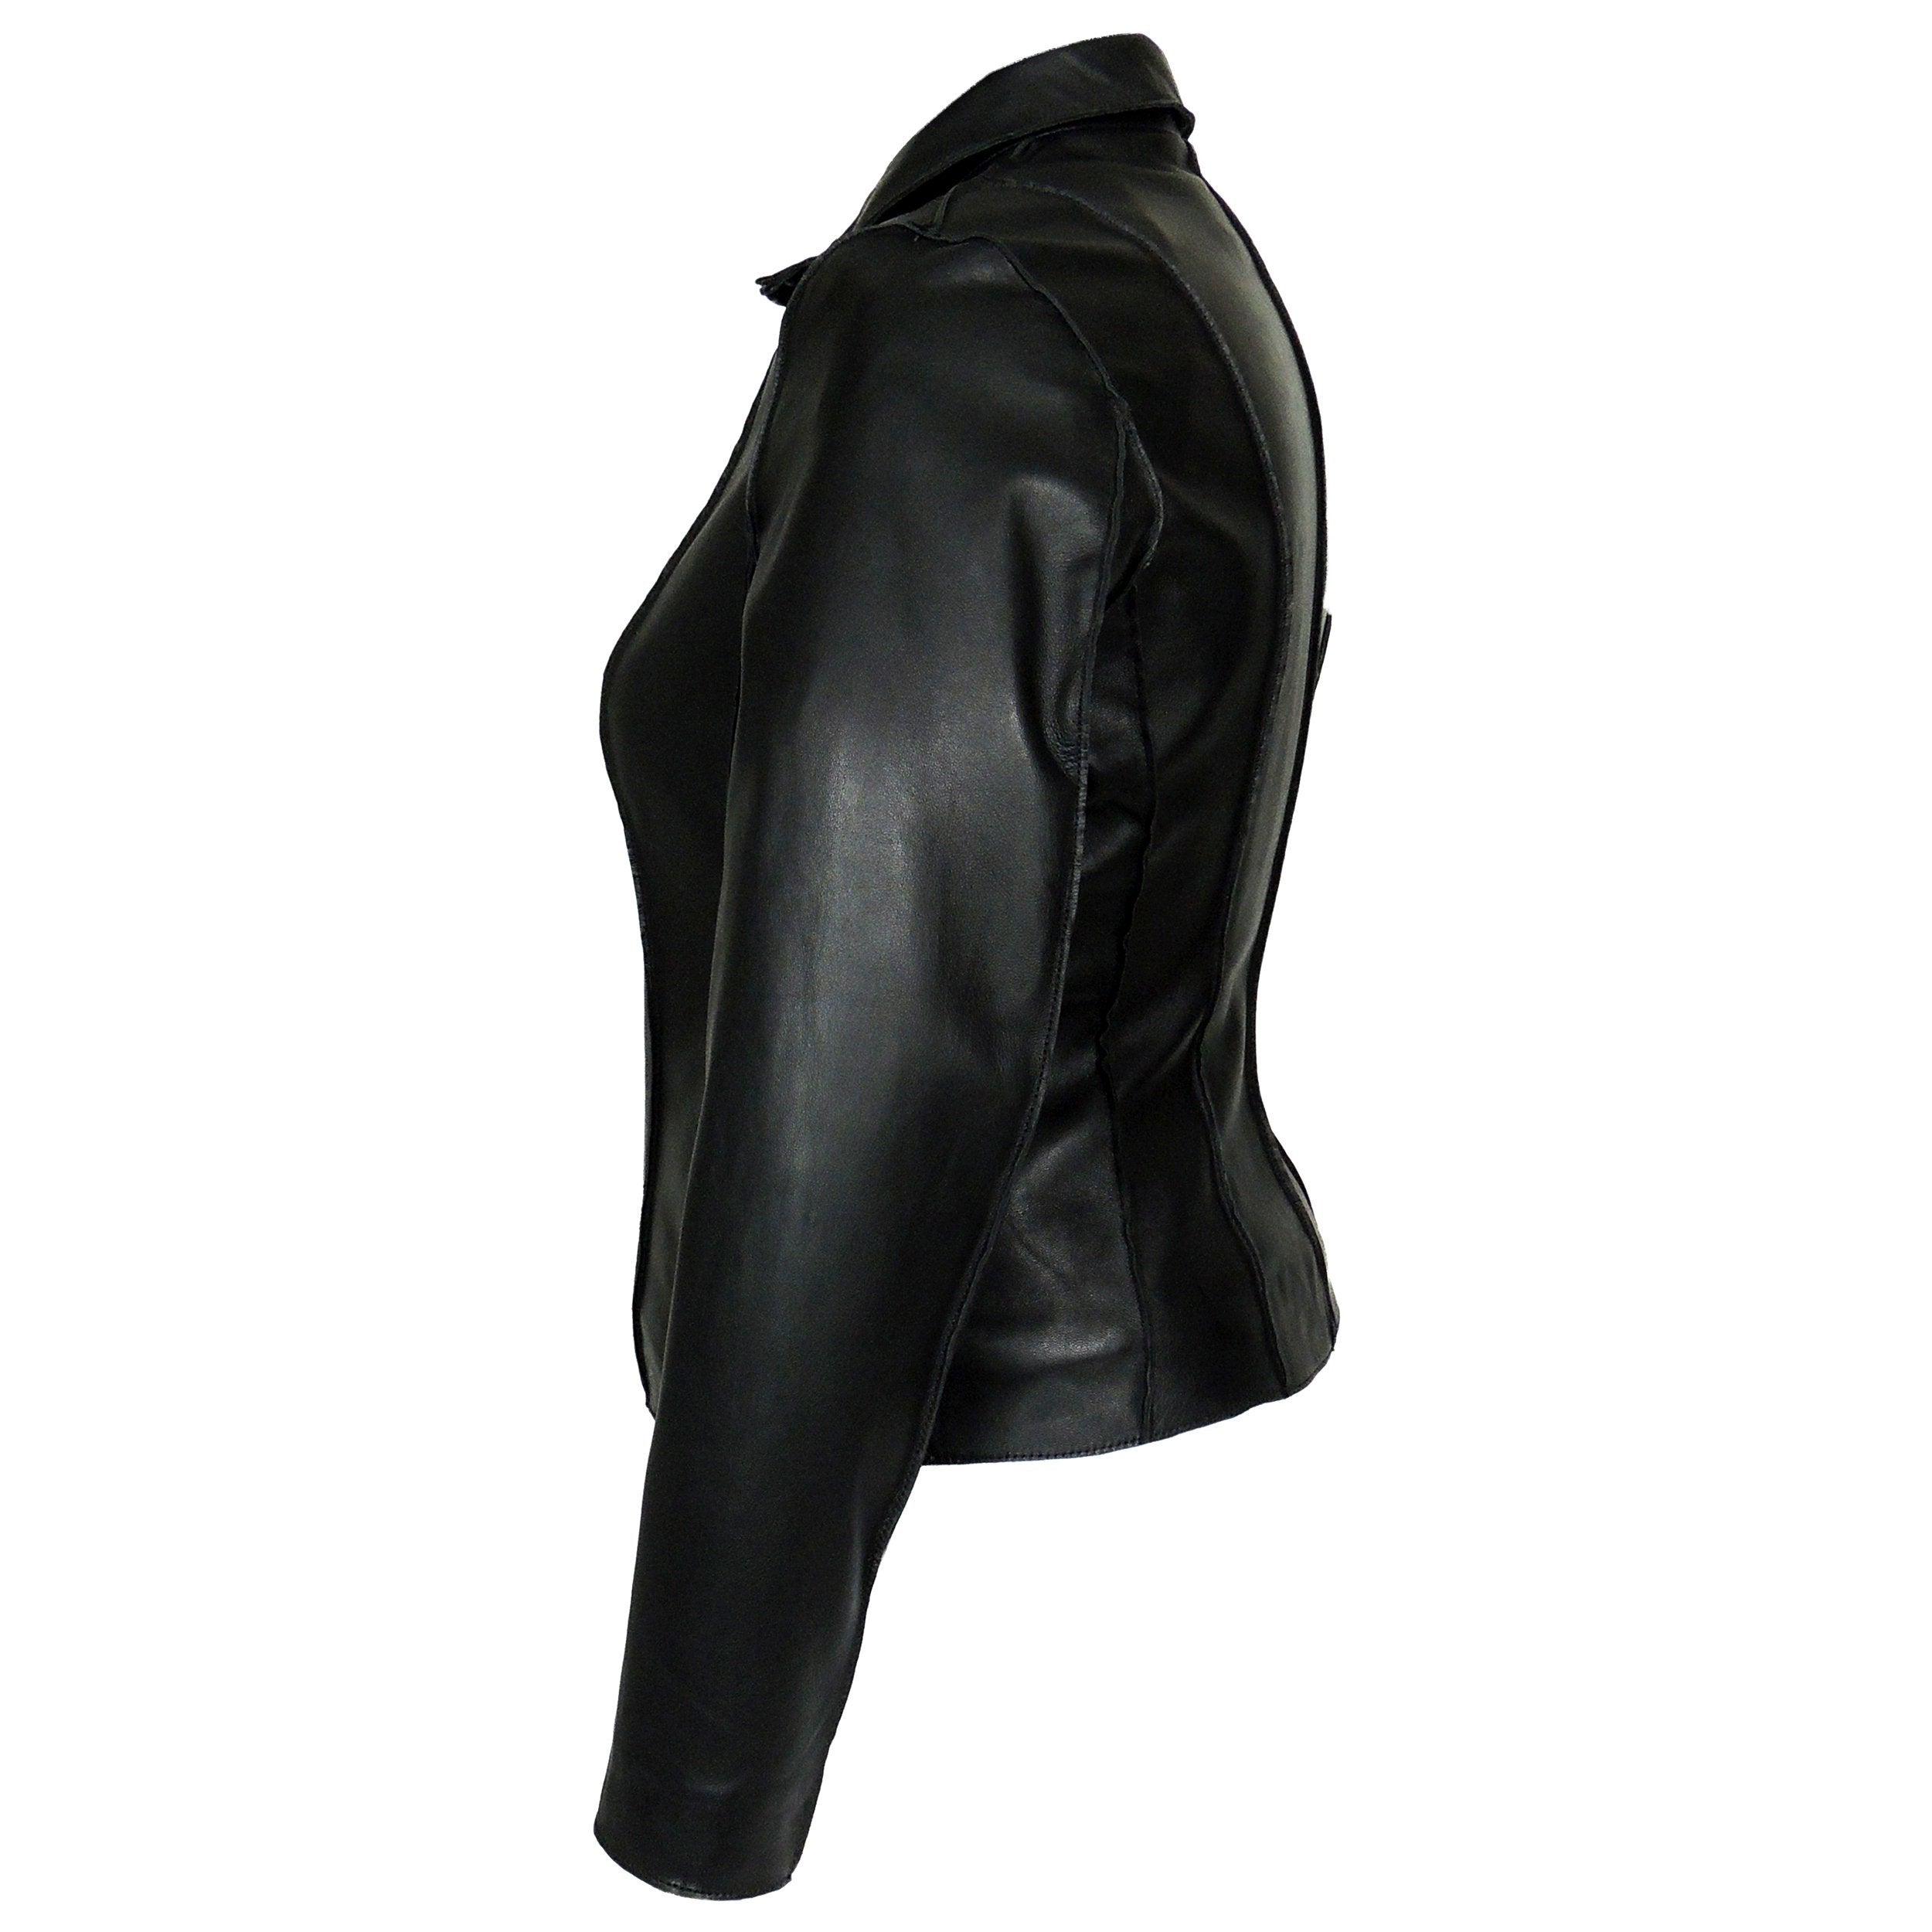 Picture of a Women's Professional Stunner Sheepskin Leather Jacket black side view